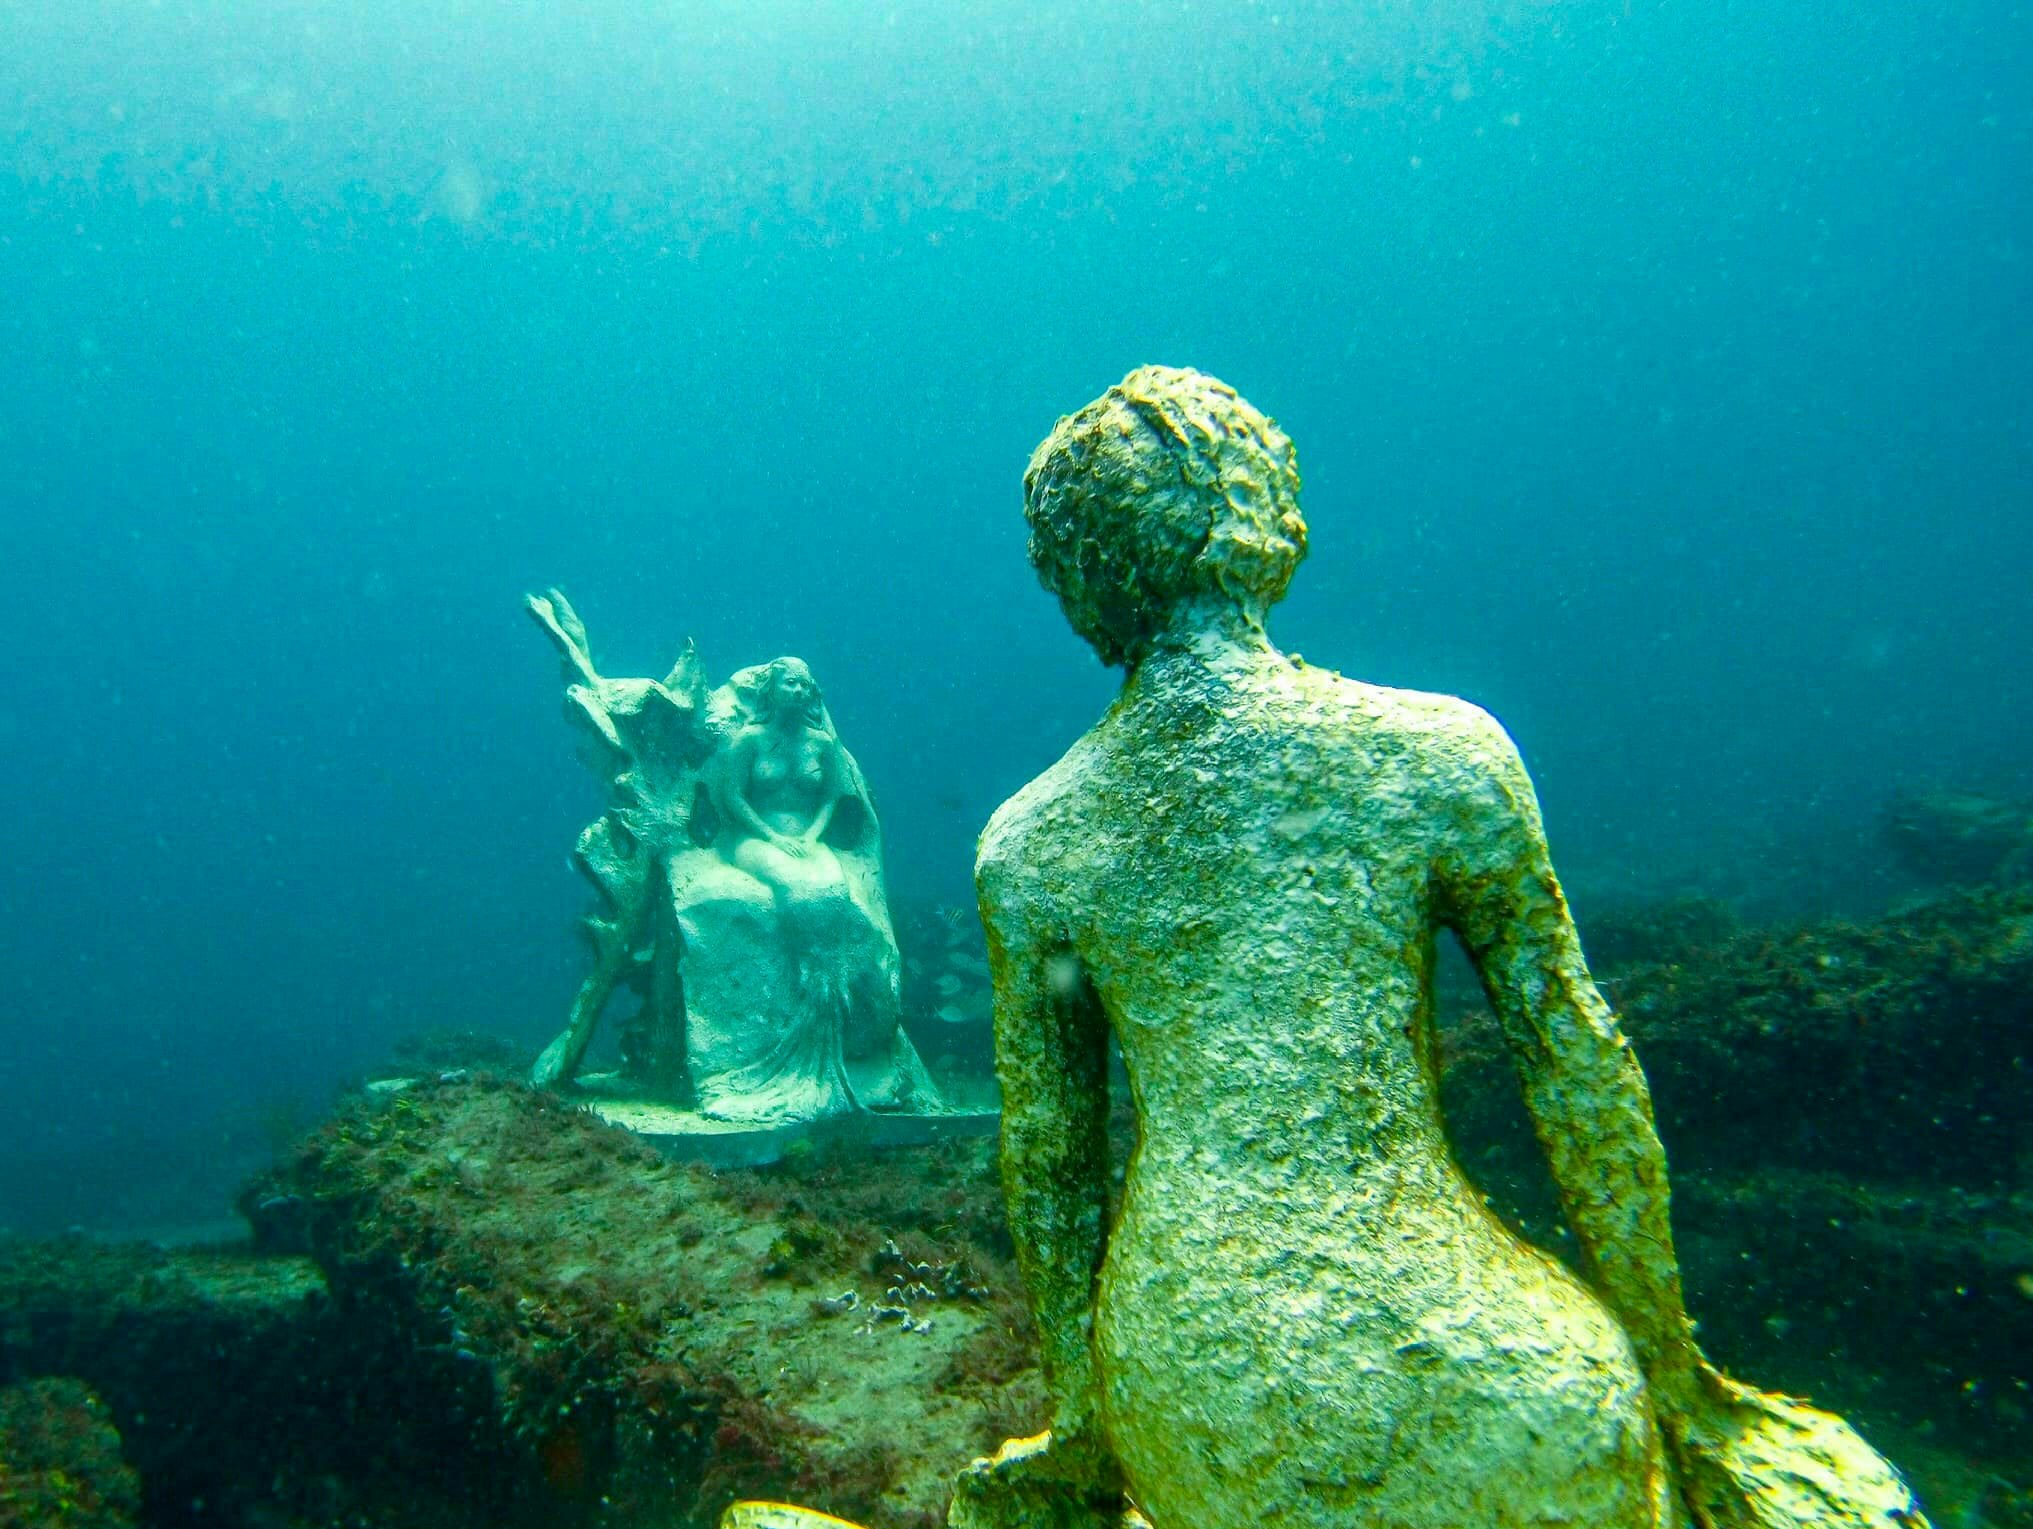 Underwater shot of a pair of mermaid sculptures, one facing the camera and the other with its back to its to the camera. Both sculptures sit on an underwater shelf in the ocean.  